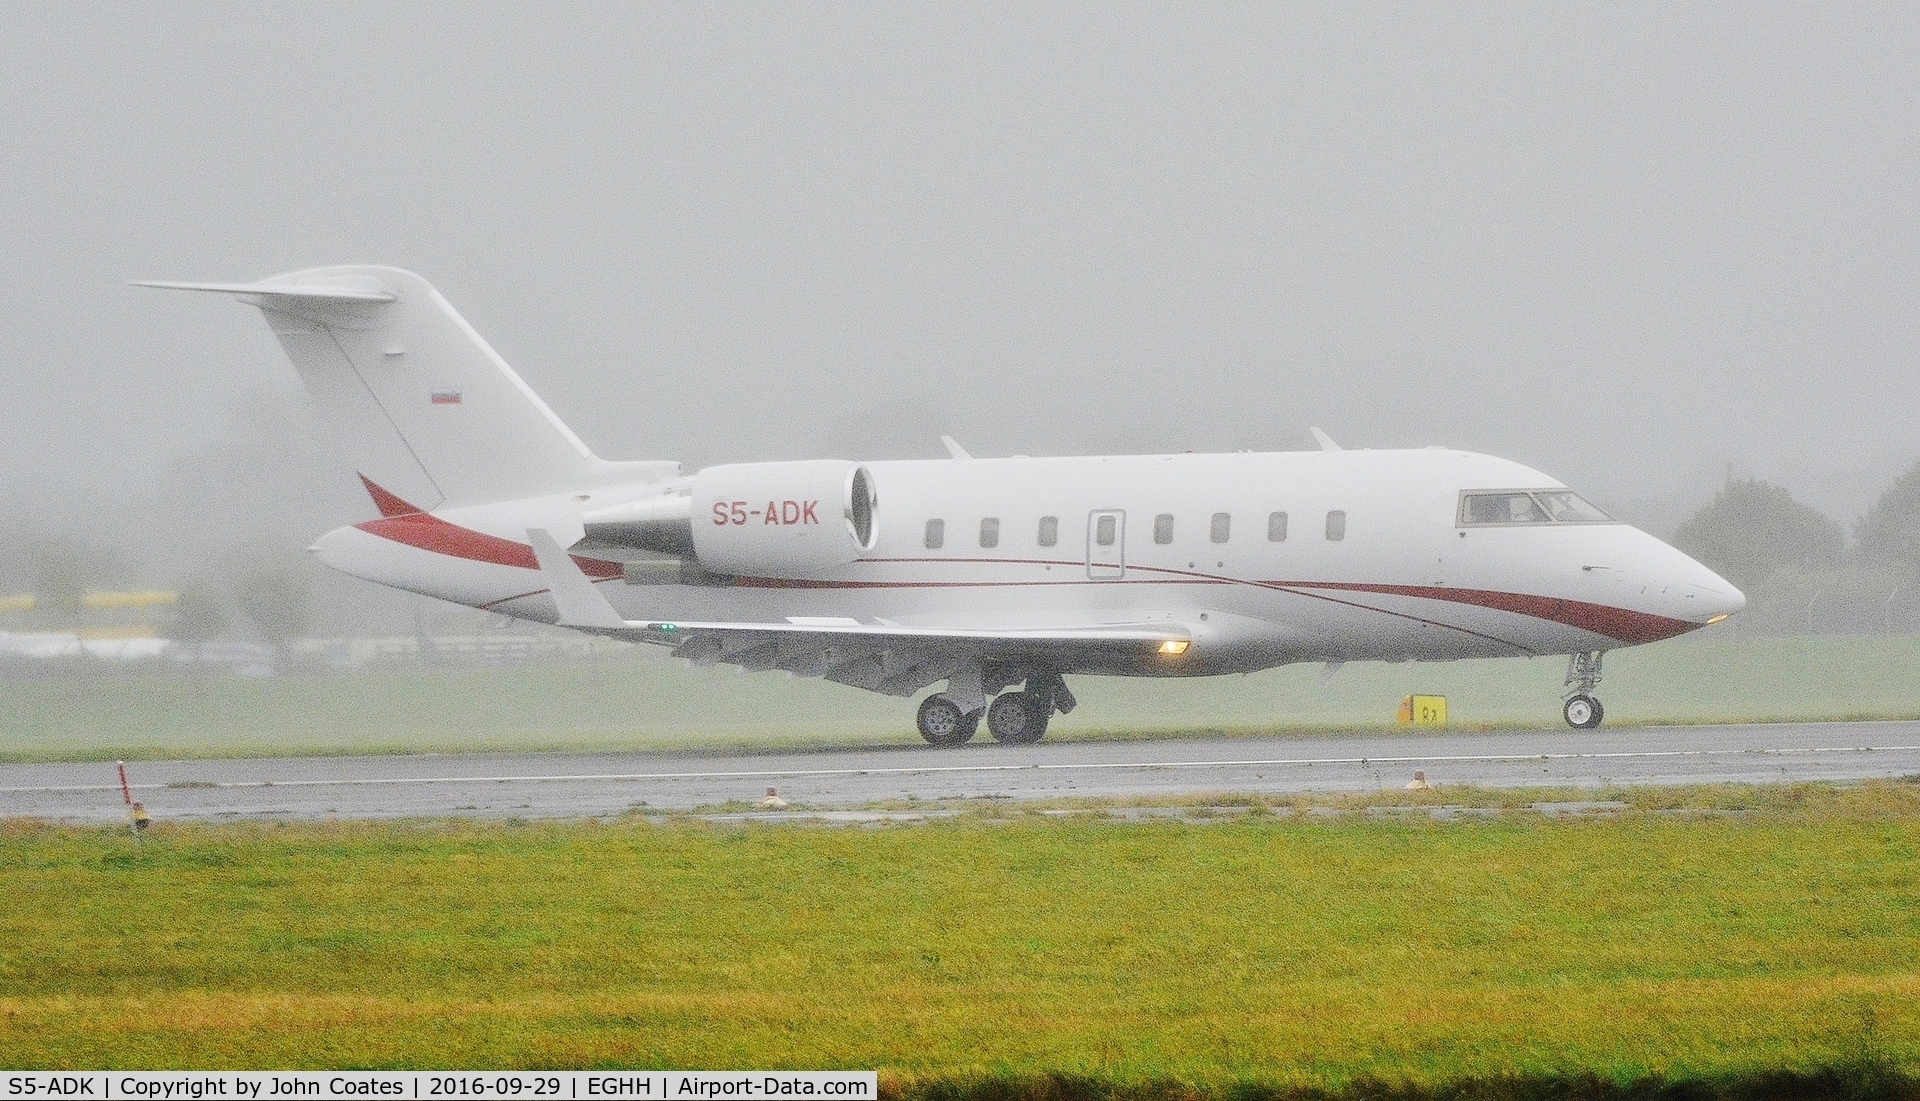 S5-ADK, 2010 Bombardier Challenger 605 (CL-600-2B16) C/N 5855, Early morning arrival through the mist and drizzle